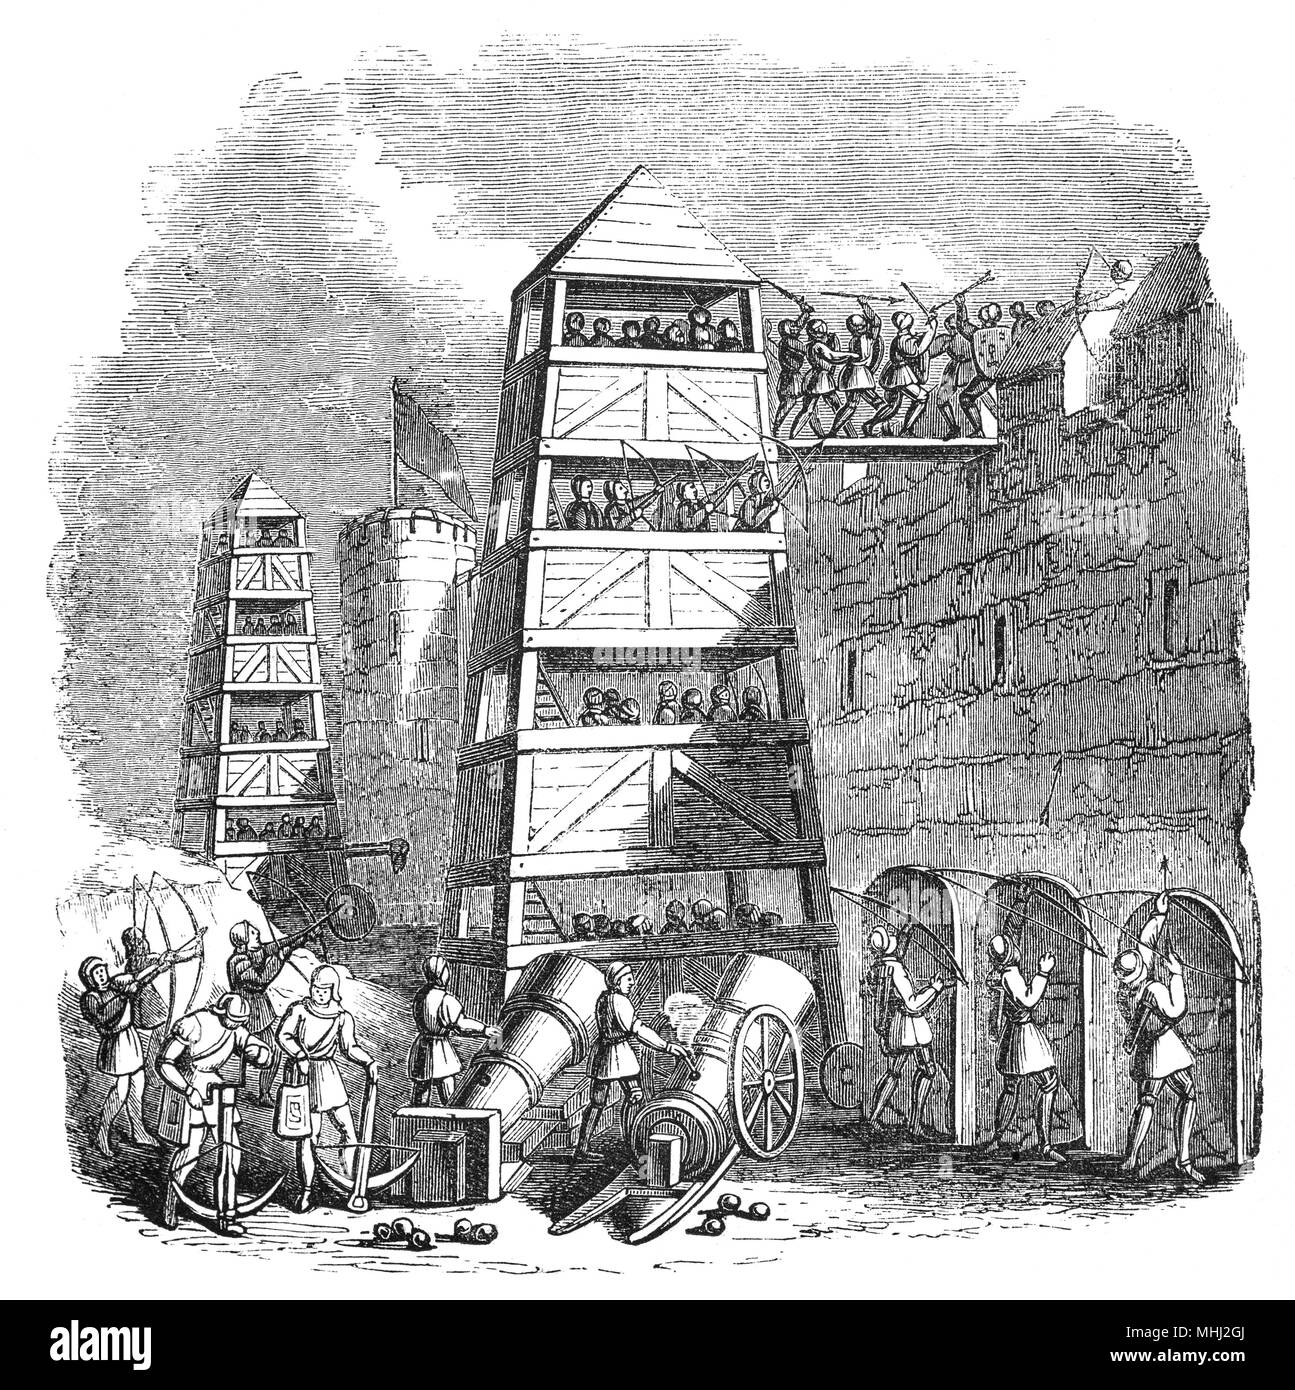 A siege tower in the 14th Century from which longbows and crossbows could be used in siege warfare. They were used along side Cannon that replaced the various types of catapults but still included a wide variety of siege engines like scaling ladders and battering rams. Stock Photo